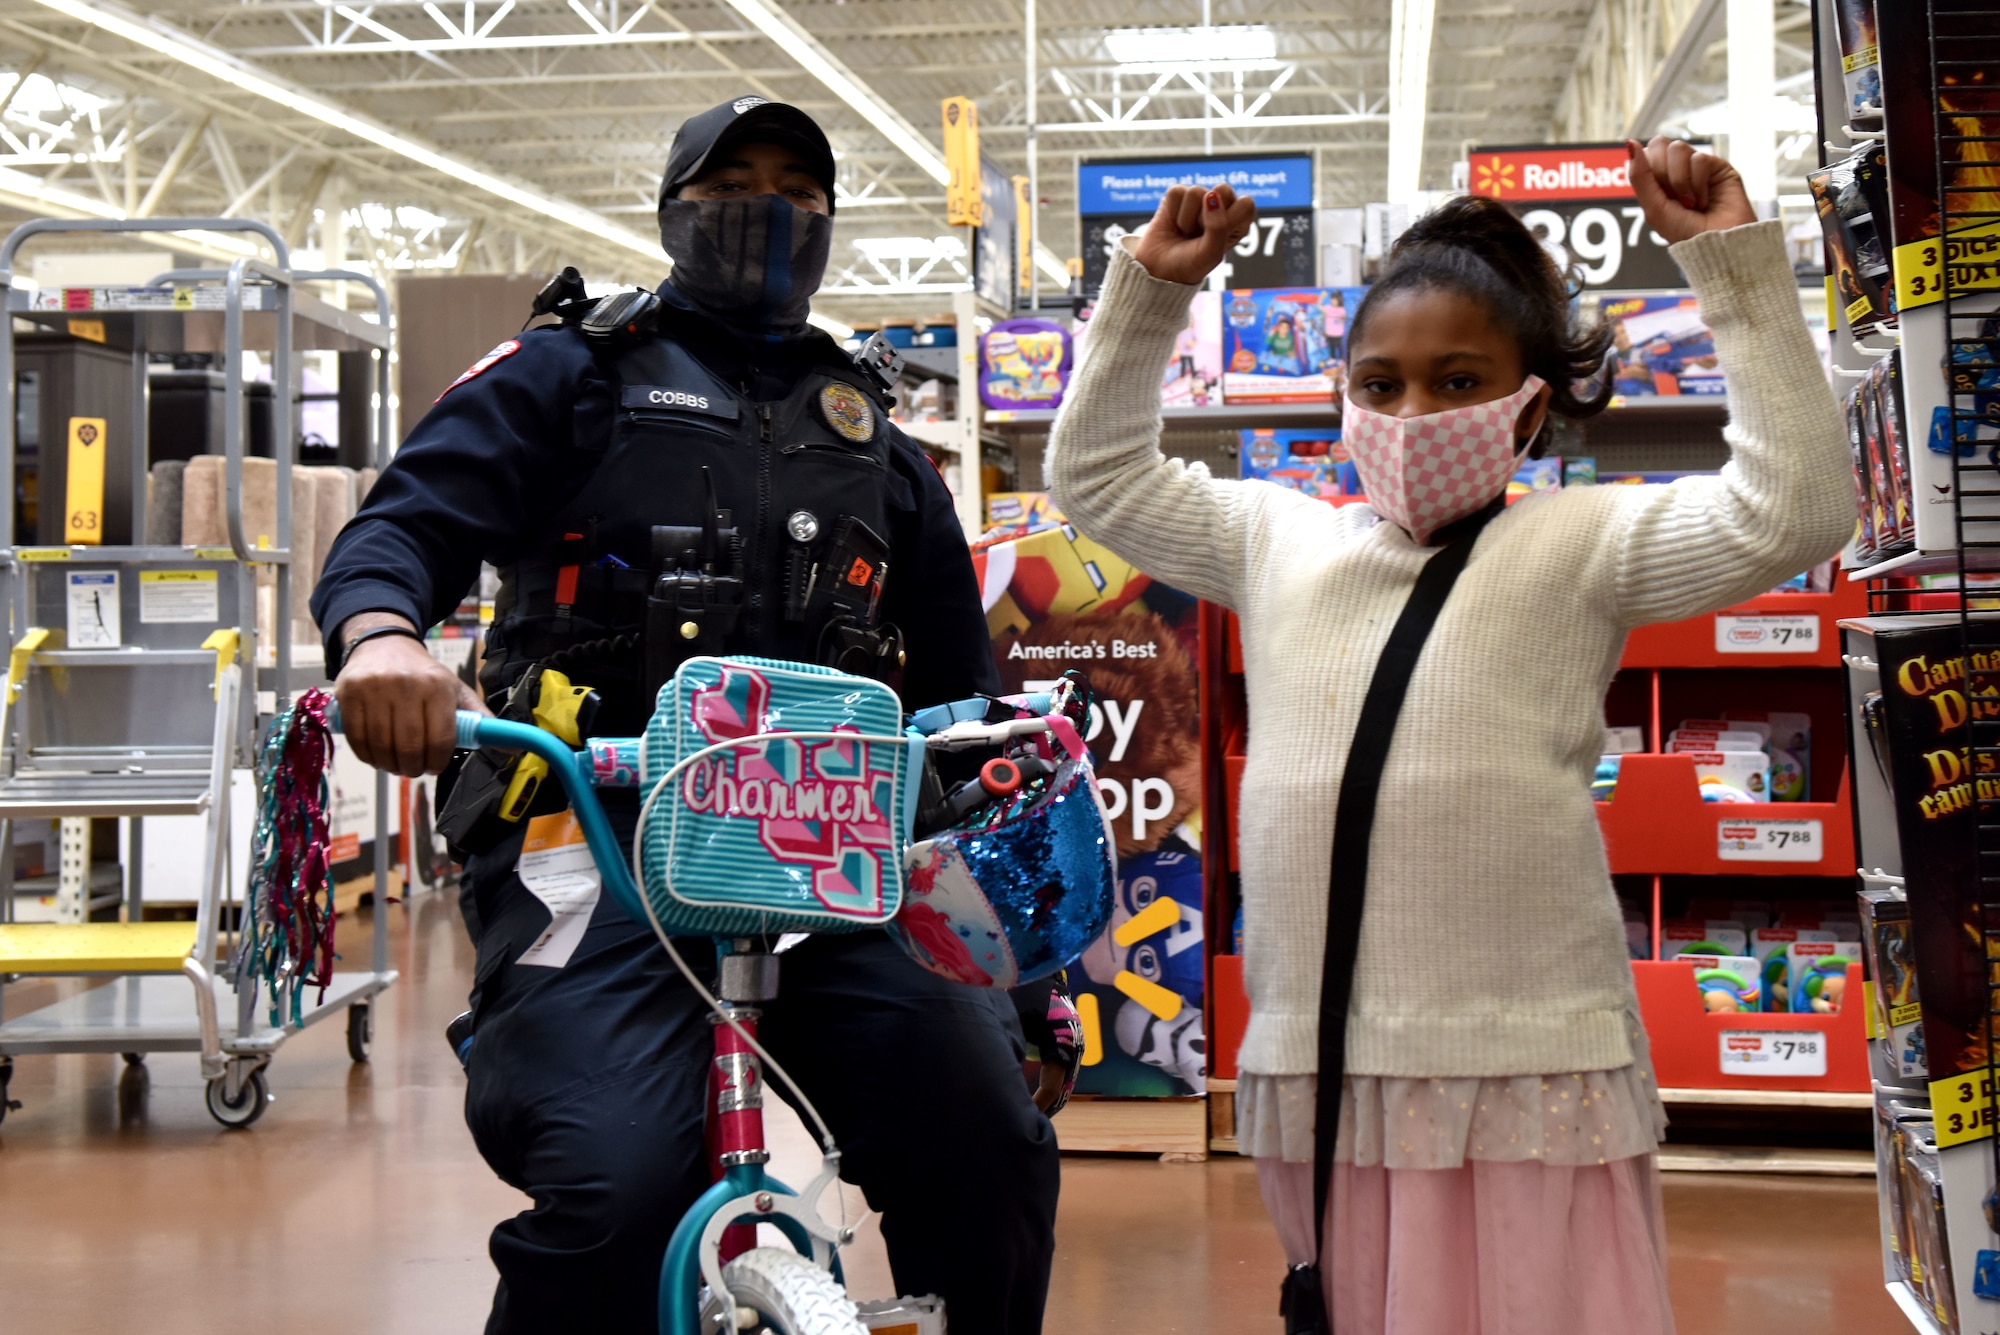 A San Angelo Police Officer tests out a bike that a participant in the 13th Annual Operation Blue Santa picked out as one of their gifts during the event in San Angelo, Texas, Dec. 12, 2020. Any child that picked out a bike also had to select a helmet for when they ride. (U.S. Air Force photo by Staff Sgt. Seraiah Wolf)